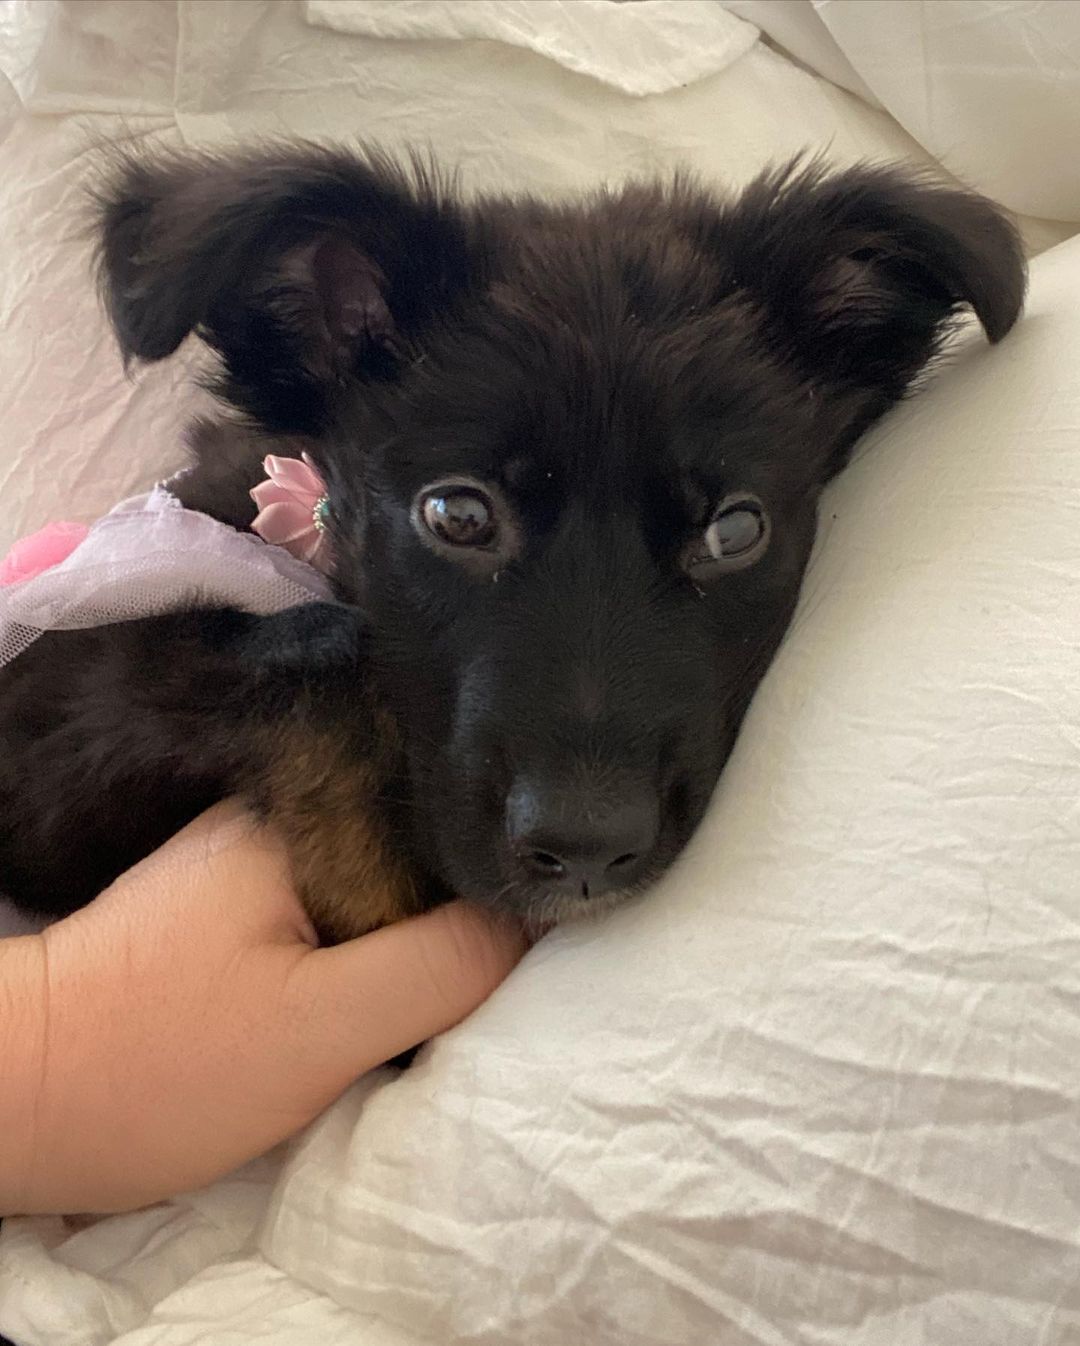 ⚠️ WARNING ⚠️ Graphic content on the second photo ❗️ Meet Gigi ❣️ a three month old Husky/Collie/Shepherd mix puppy who was playing along a perimeter fence, when a big dog on the other side suddenly, and quite literally, ripped off her front left leg 💔 She nearly bled to death before she was surrendered to our incredible rescue partner Sharon at New Beginnings, who then rushed her to her vet 😢 Gigi was so far gone, she flatlined on the table and they had to use CPR to resuscitate her. This girl, with her puppy breath and baby teeth, is such a survivor and truly an incredible miracle ✨🙏🏼 we’re so grateful to have her here at Big Love 💕Our foster/adoption coordinator Rachel has been fostering her and says she is recovering beautifully 🥰🥰🥰🥰 she loves to play and can’t wait each day to drink her chicken bone broth and roll around in the grass 😆

⬅️ Scroll through to see her progress over the last 10 days — the last slide/ video was taken today!!! 😍 we are taking applications for her but we are definitely going to be very selective! Gigi absolutely needs another playful but gentle dog and a family with a lot of time for her — tripod experience is a huge plus ❗️

🙏🏼🙏🏼🙏🏼 We said it in our stories: we’ve taken in several dogs in the last two weeks and can especially use your help right now with funds! Thank you for any and all donations 🙏🏼🙏🏼🙏🏼

Venmo • @bigloveanimalrescue 
PayPal • donations@bigloveanimalrescue.org
Or our website 💕💕💕💕 THANK YOU